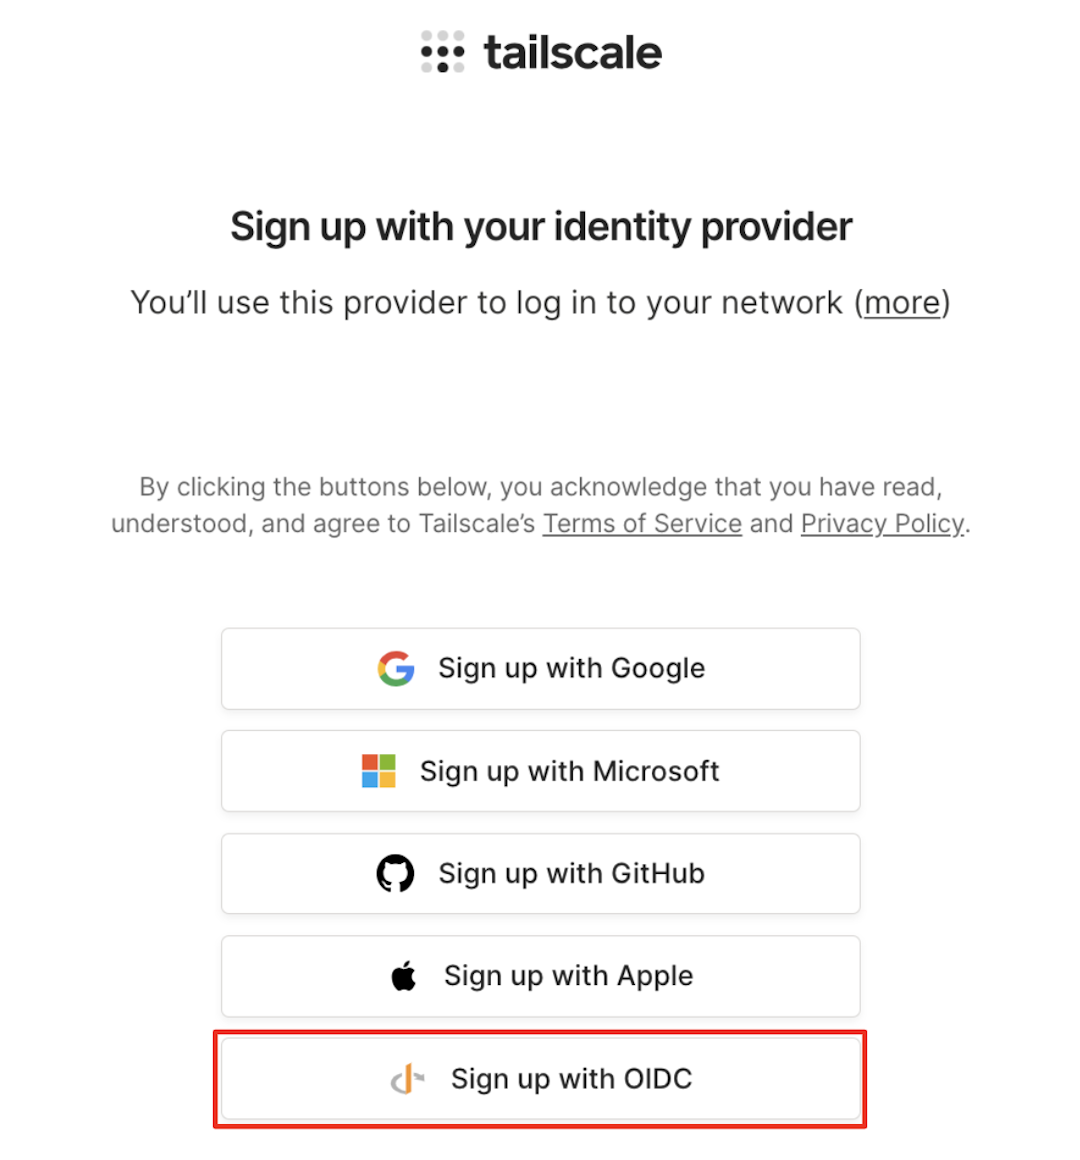 Select OIDC when signing up to Tailscale